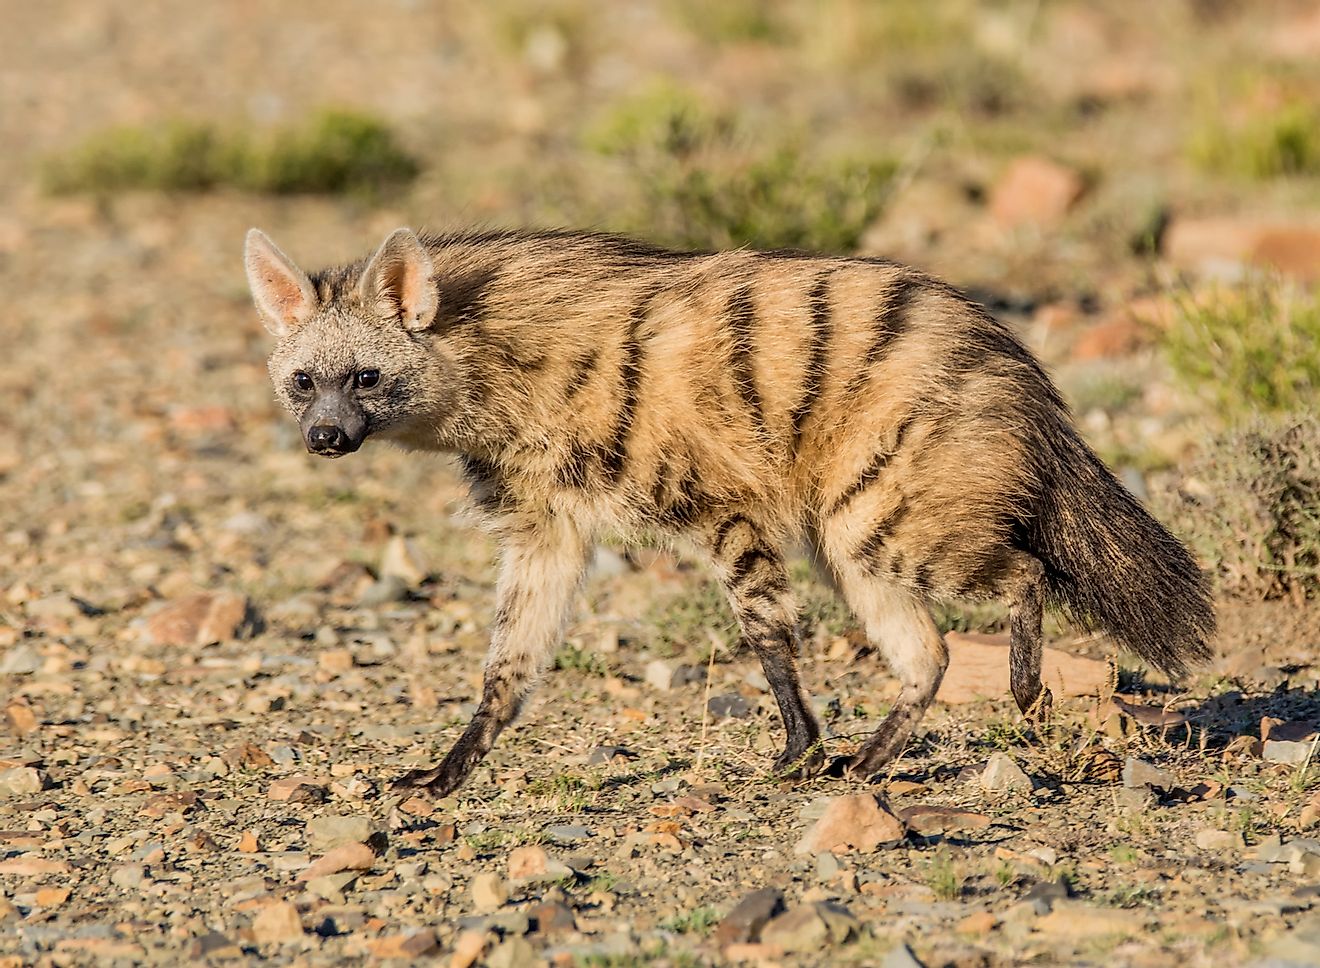 An Aardwolf comes out at sunset to forage in Southern Africa. Image credit: Cathy Withers-Clarke/Shutterstock.com